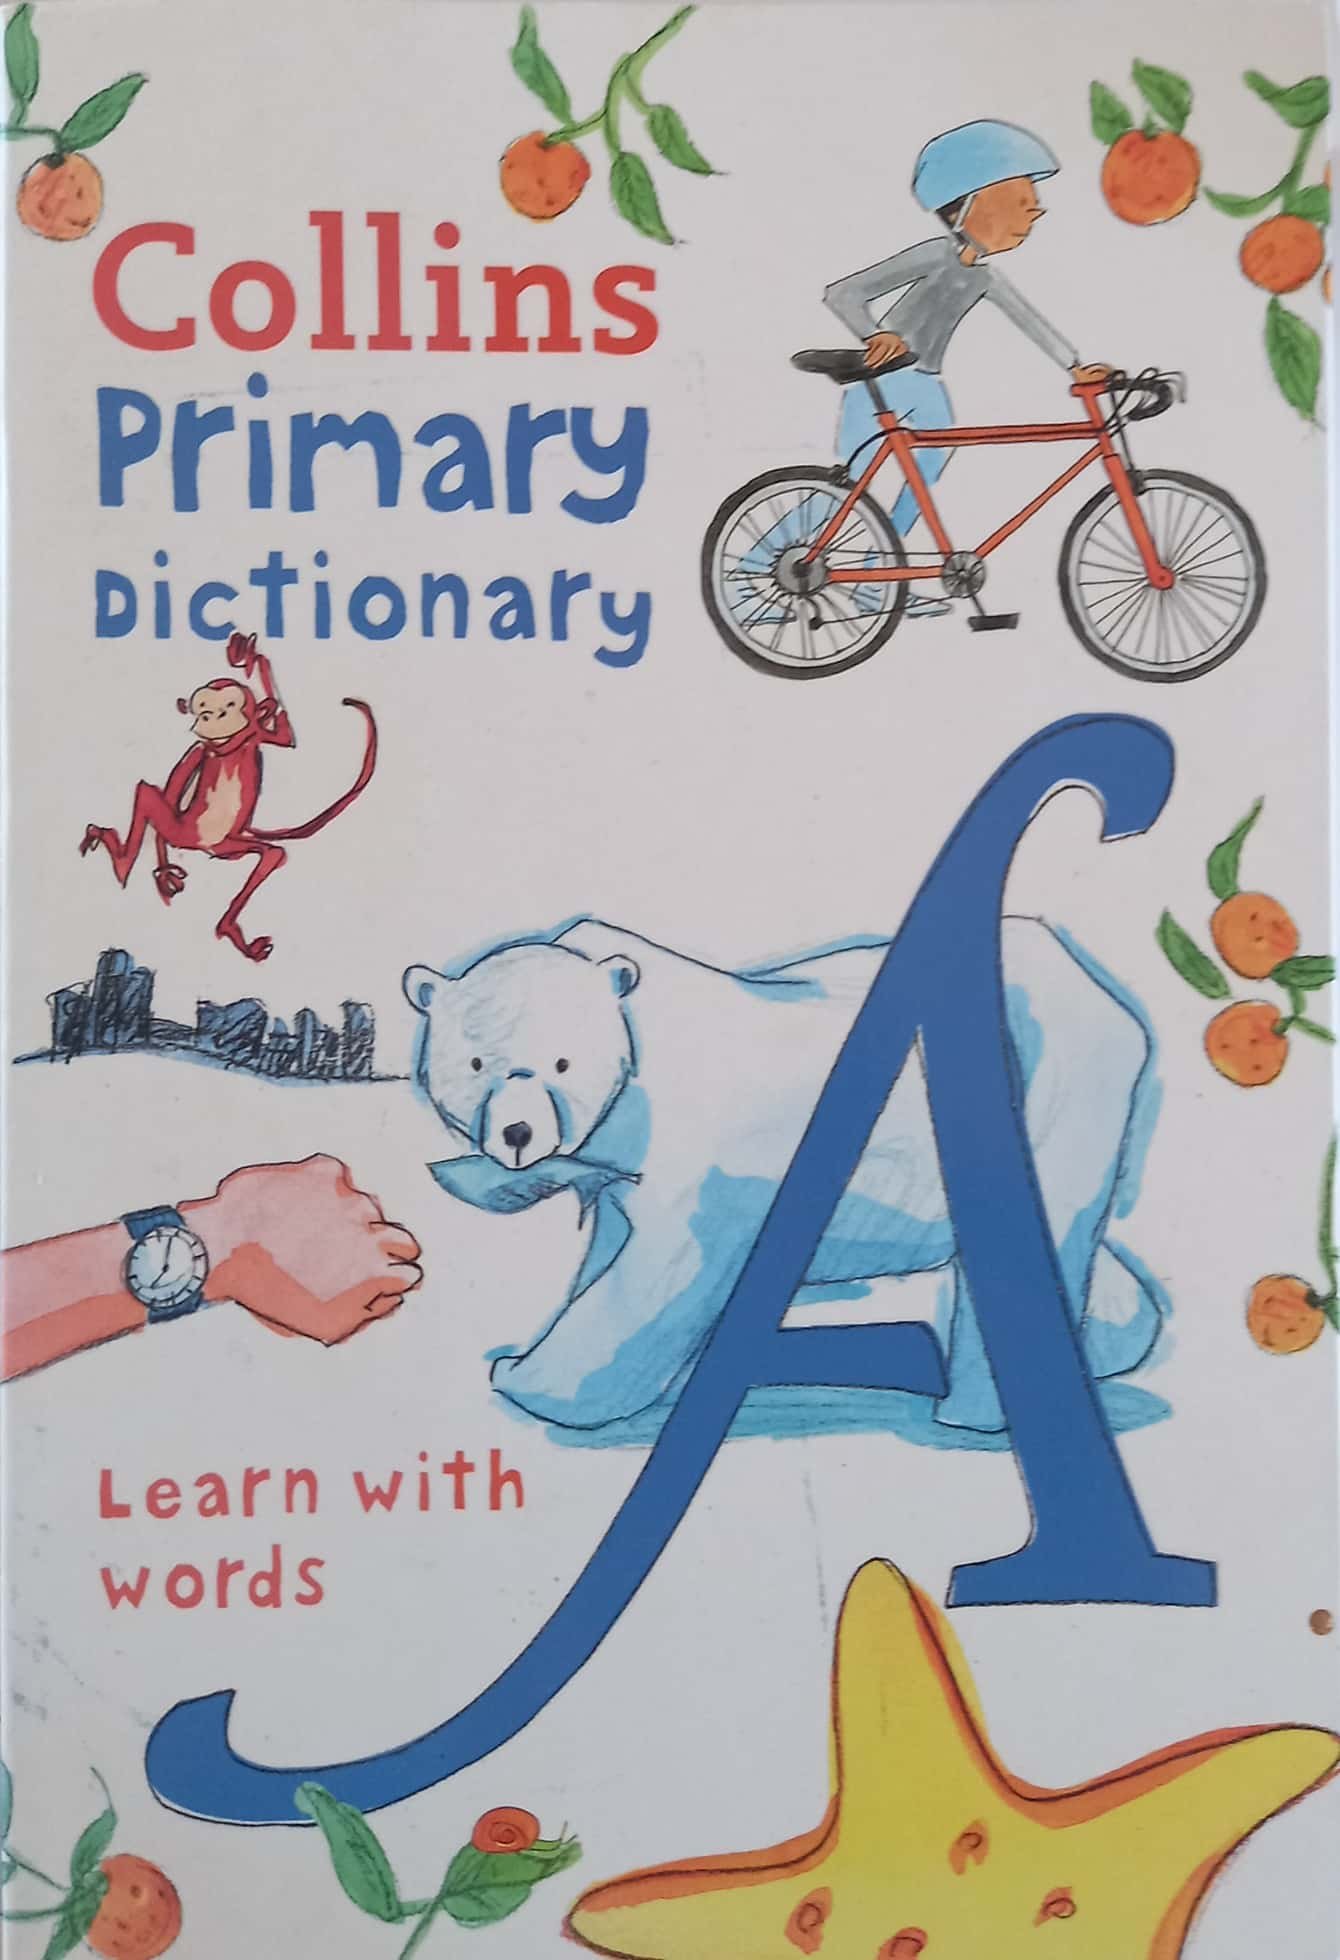 Age　Jungle　Collins　The　Learn　Primary　Dictionary　with　Book　words　7+　Jamaica